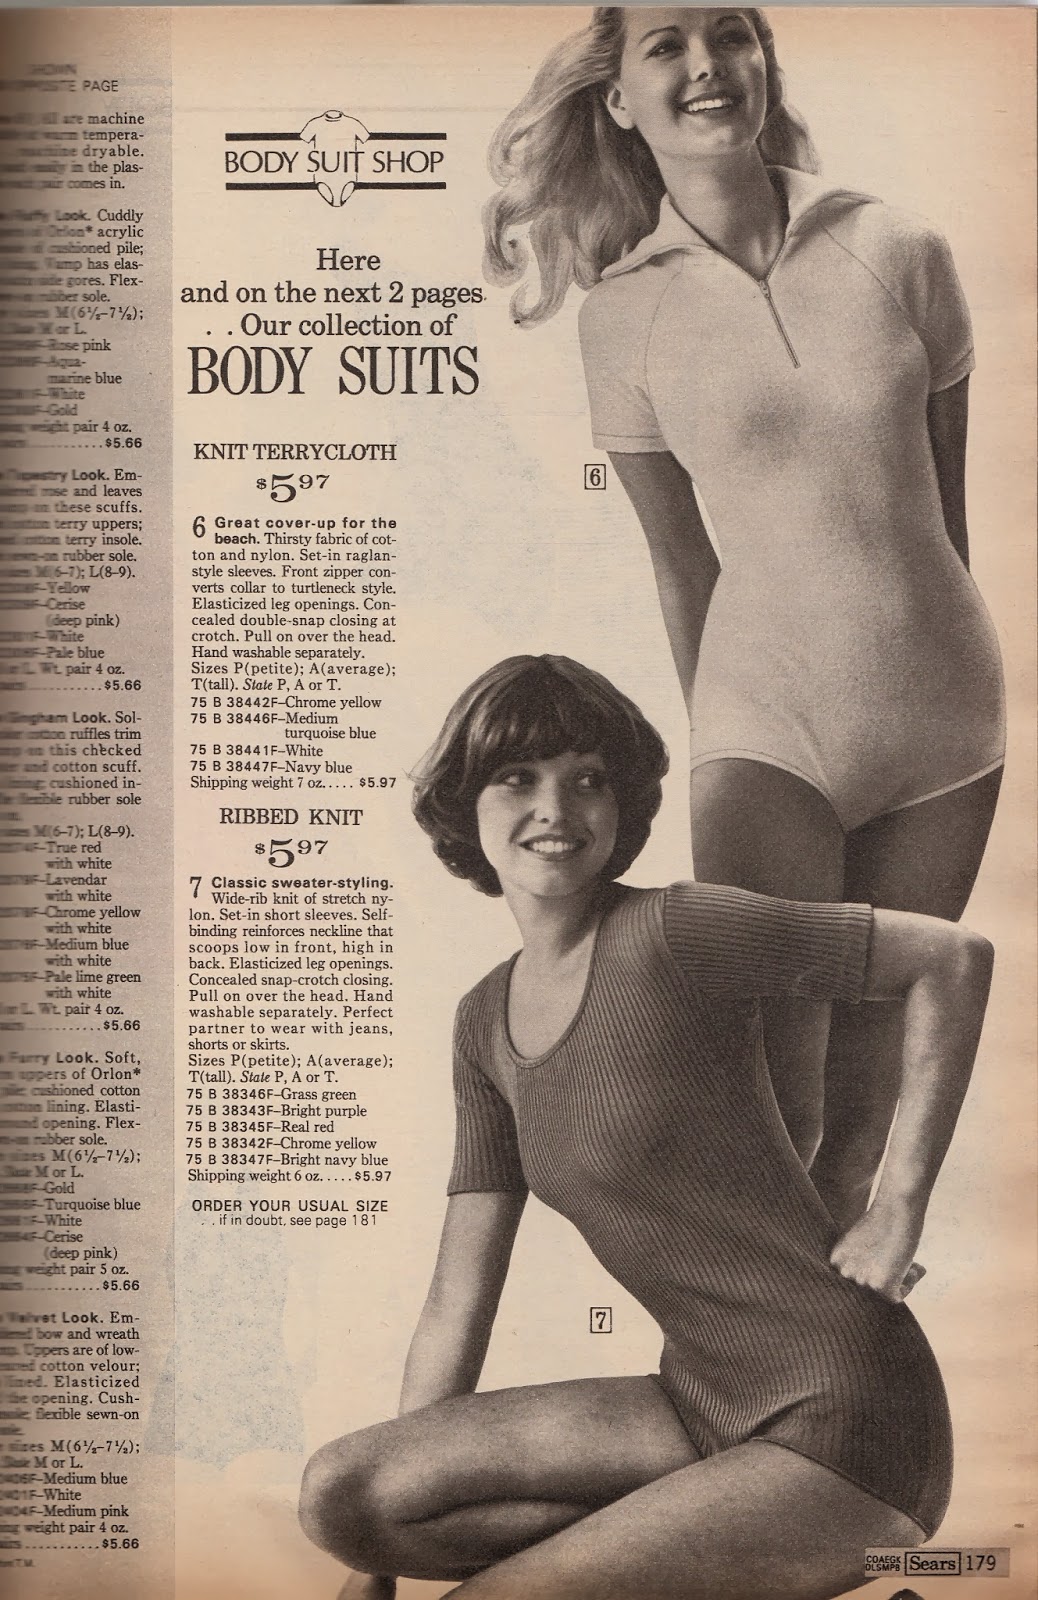 Kathy Loghry Blogspot: Body Suits / Body Shirts / Whatever - Part 4